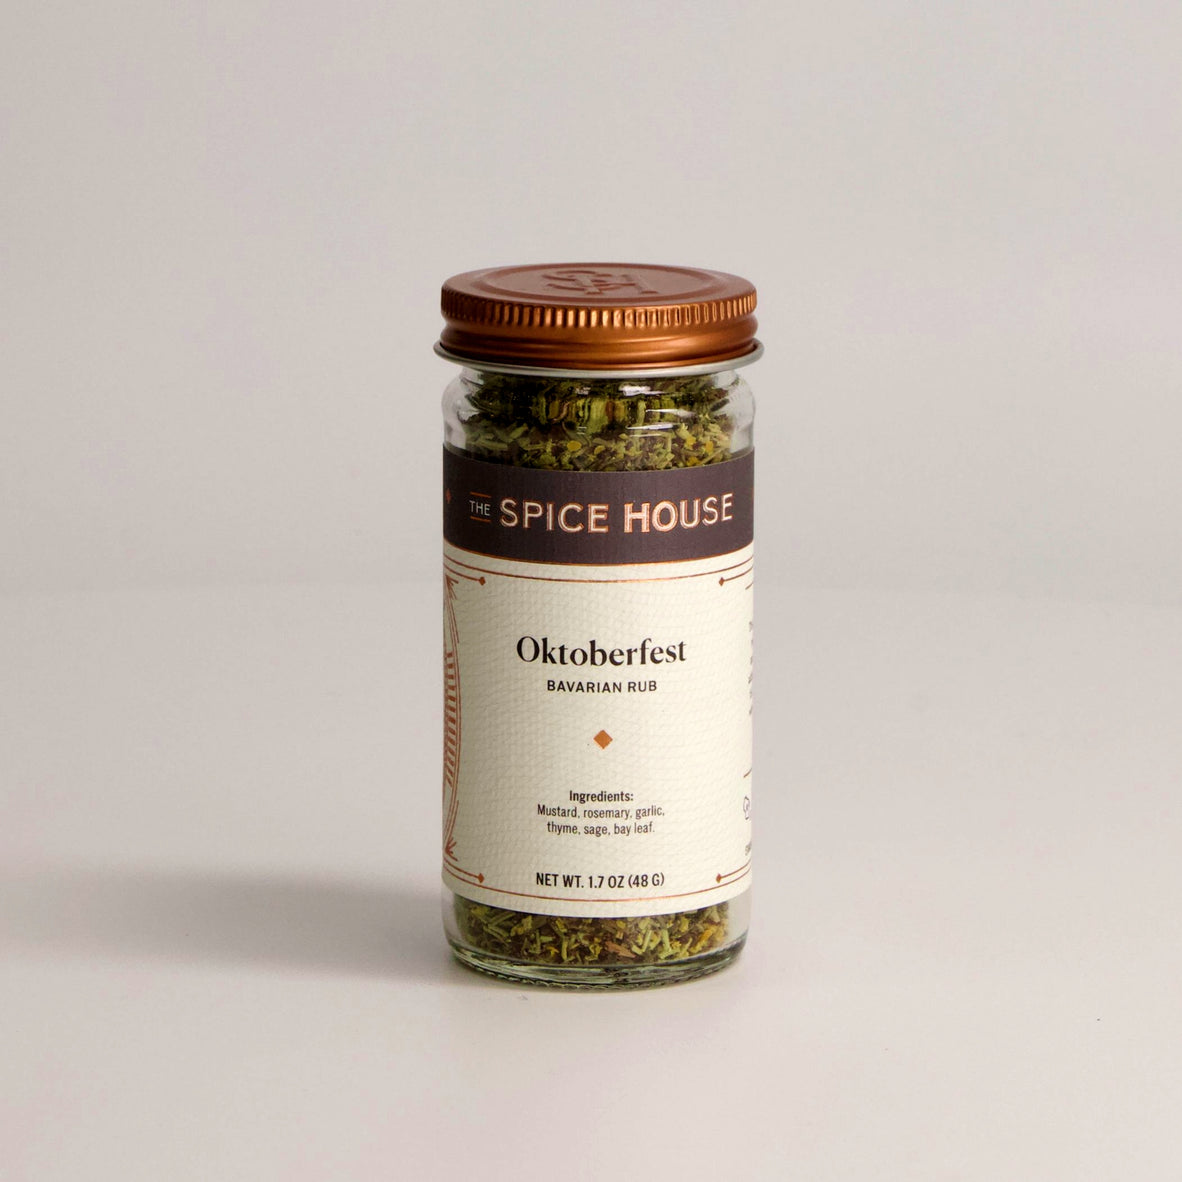 iSpice | 48 Pack of Spice and Herbs | Total Kitchen | Mixed Spices & Seasonings Gift Set | Kosher